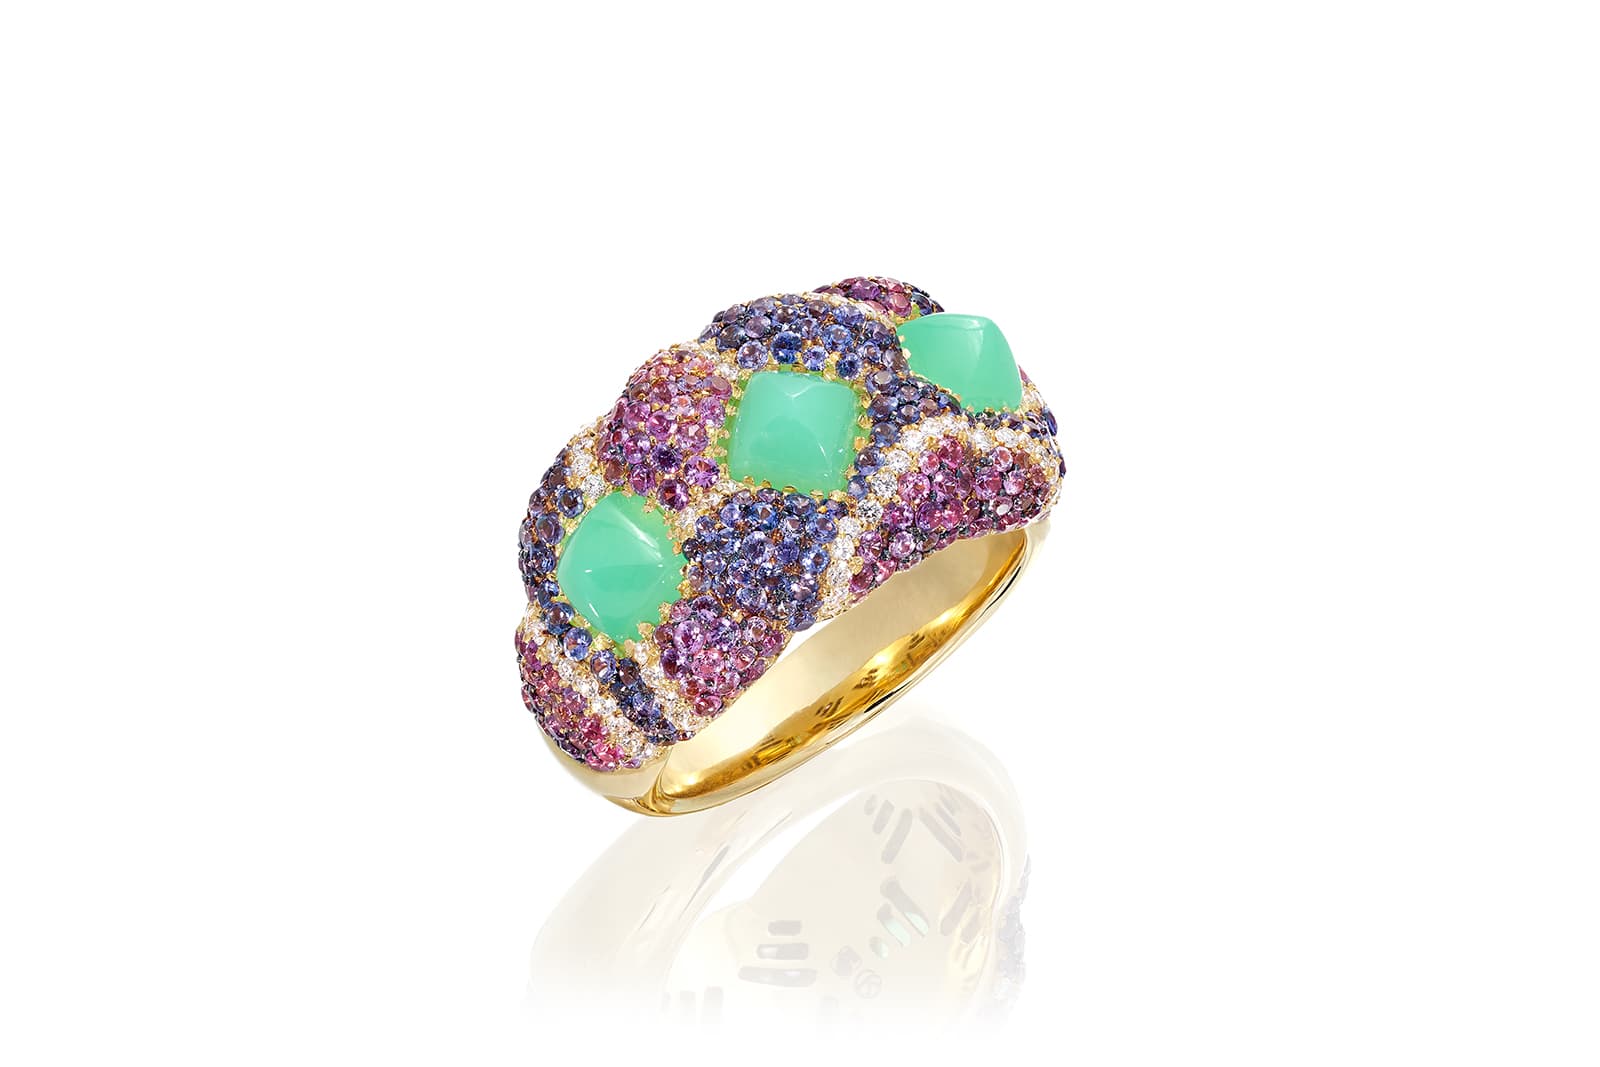 Rosior ring with three sugarloaf cabochon chrysoprases, sapphires and diamonds in a pavé setting